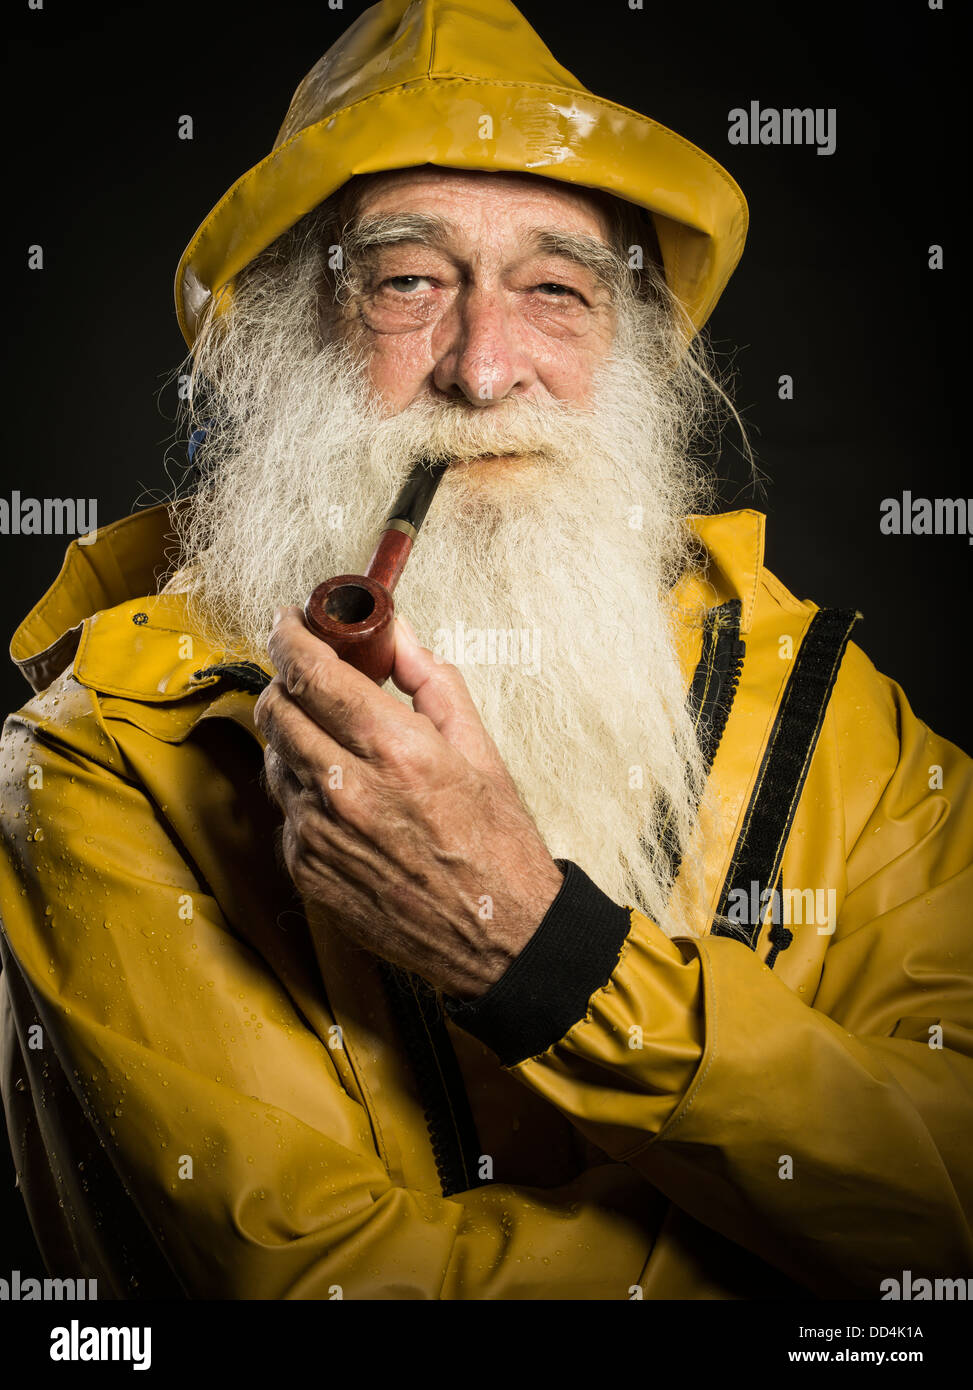 old fisherman with white beard wearing sou'wester hat and guy cotten oilskin jacket Stock Photo